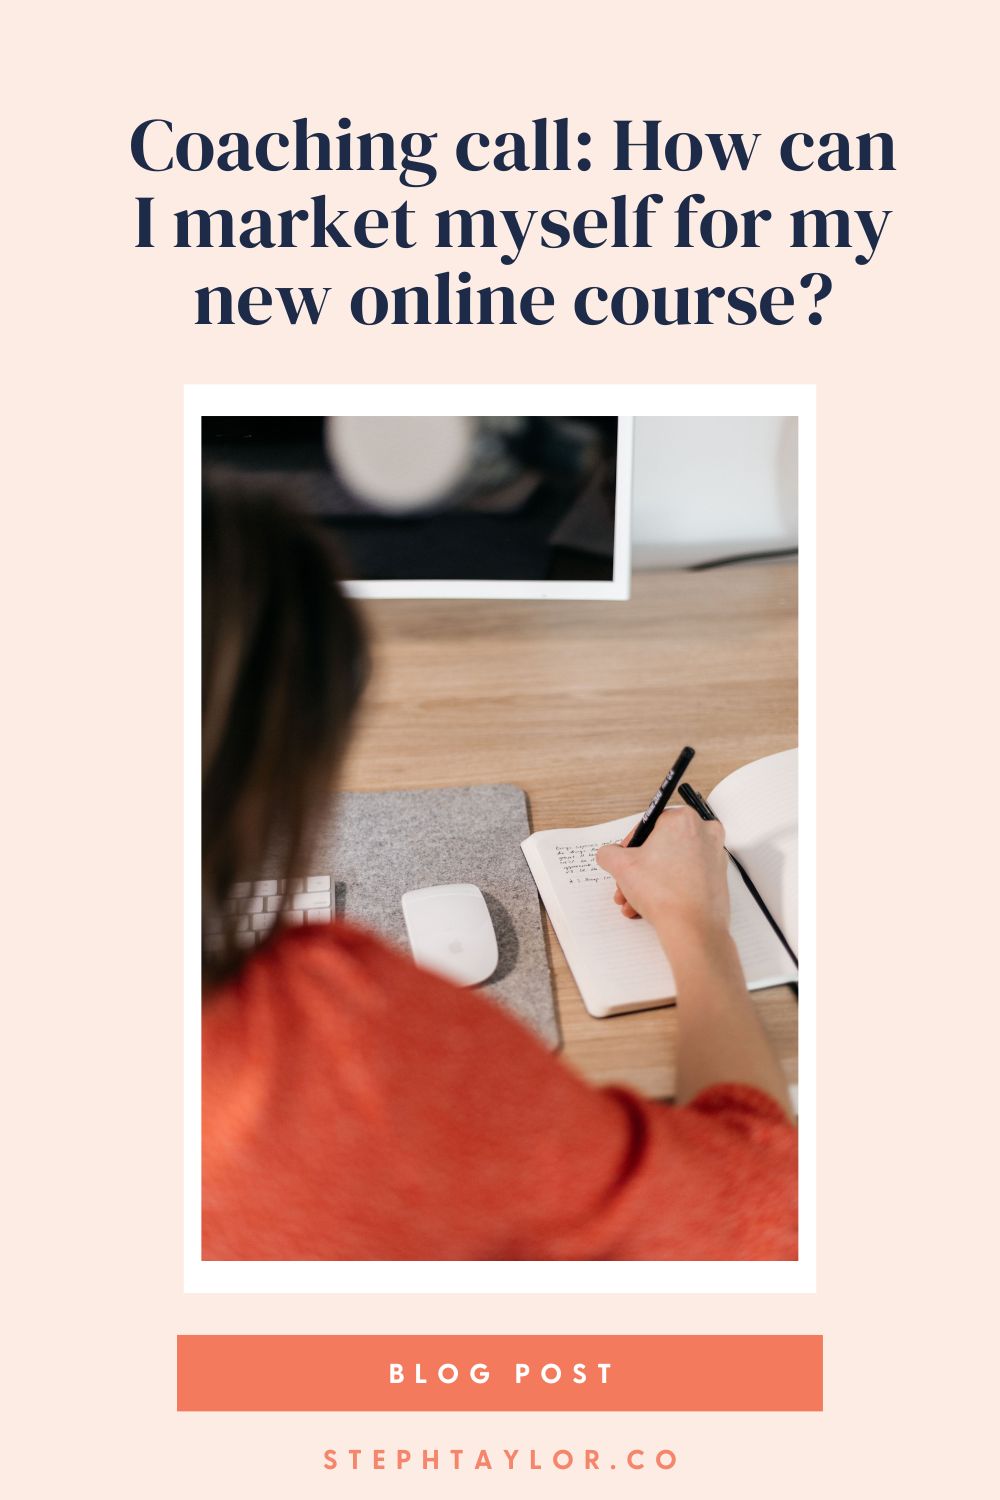 Coaching call: How can I market myself for my new online course?